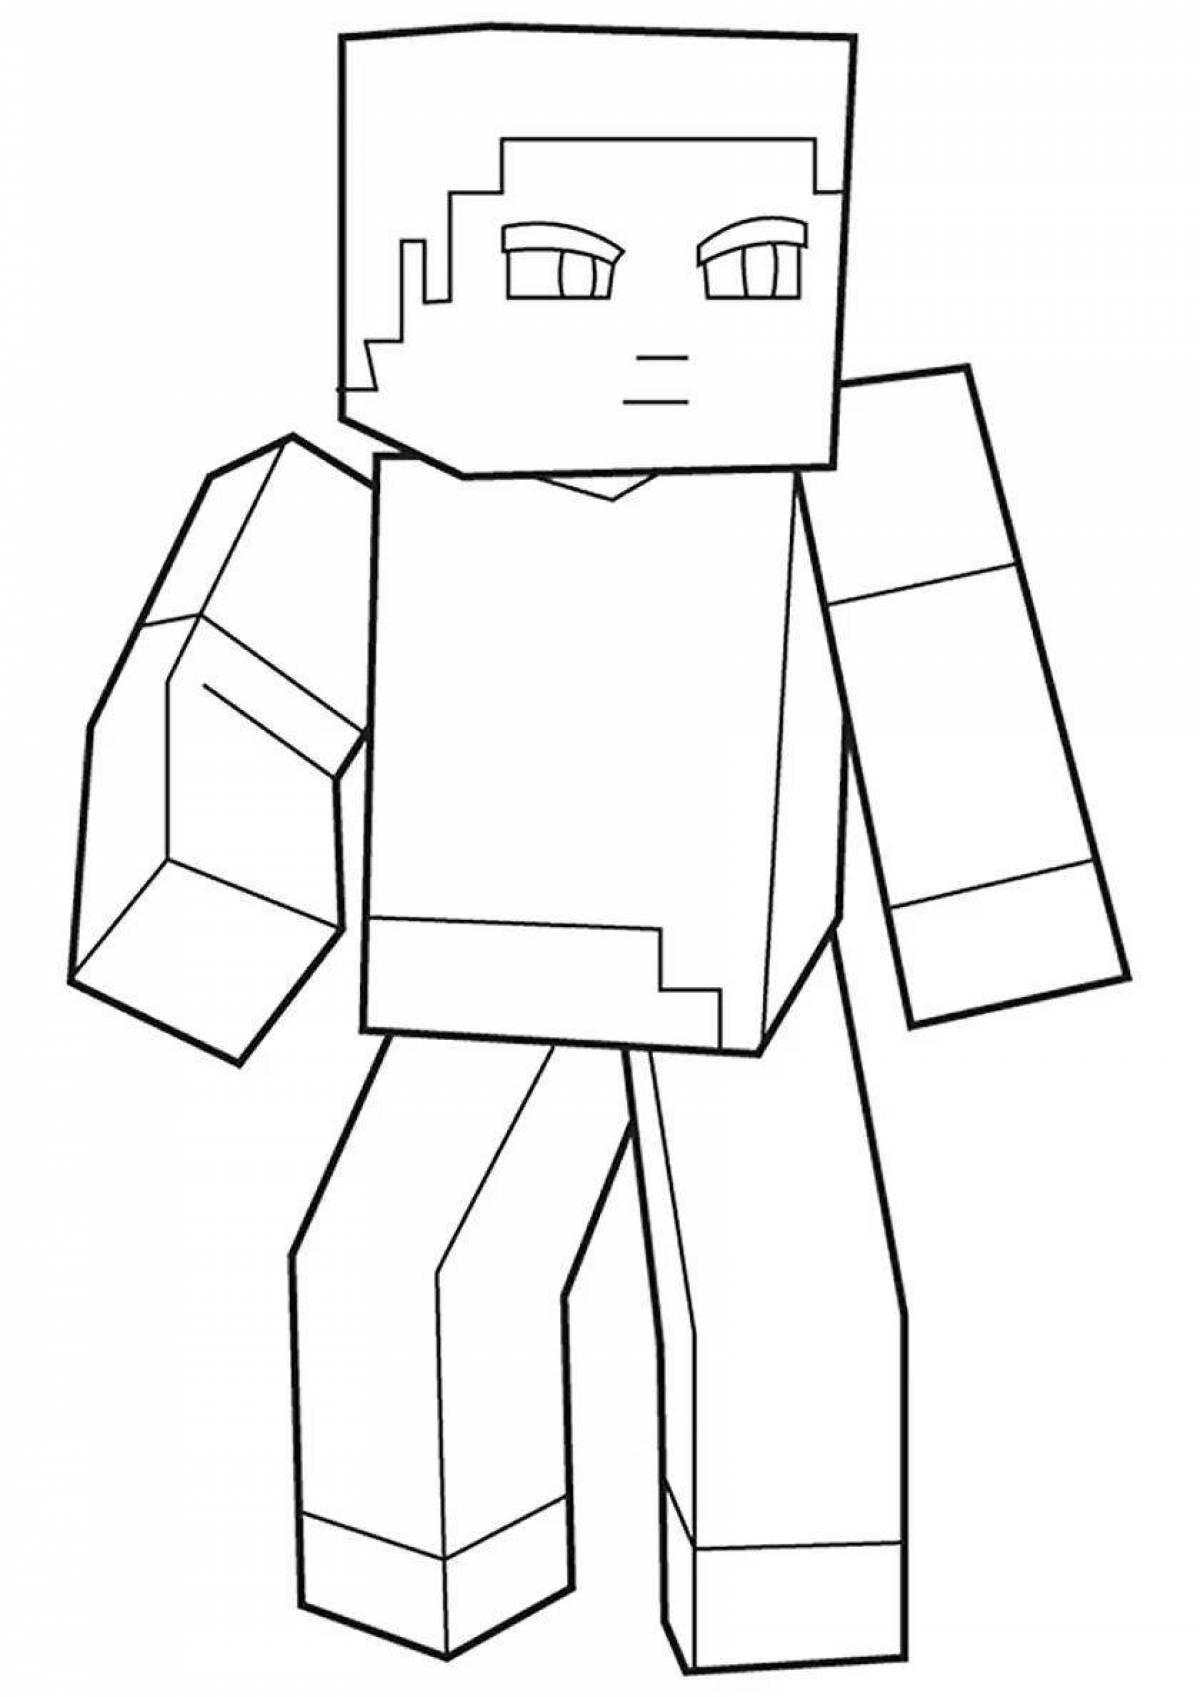 Playful minecraft cover coloring page